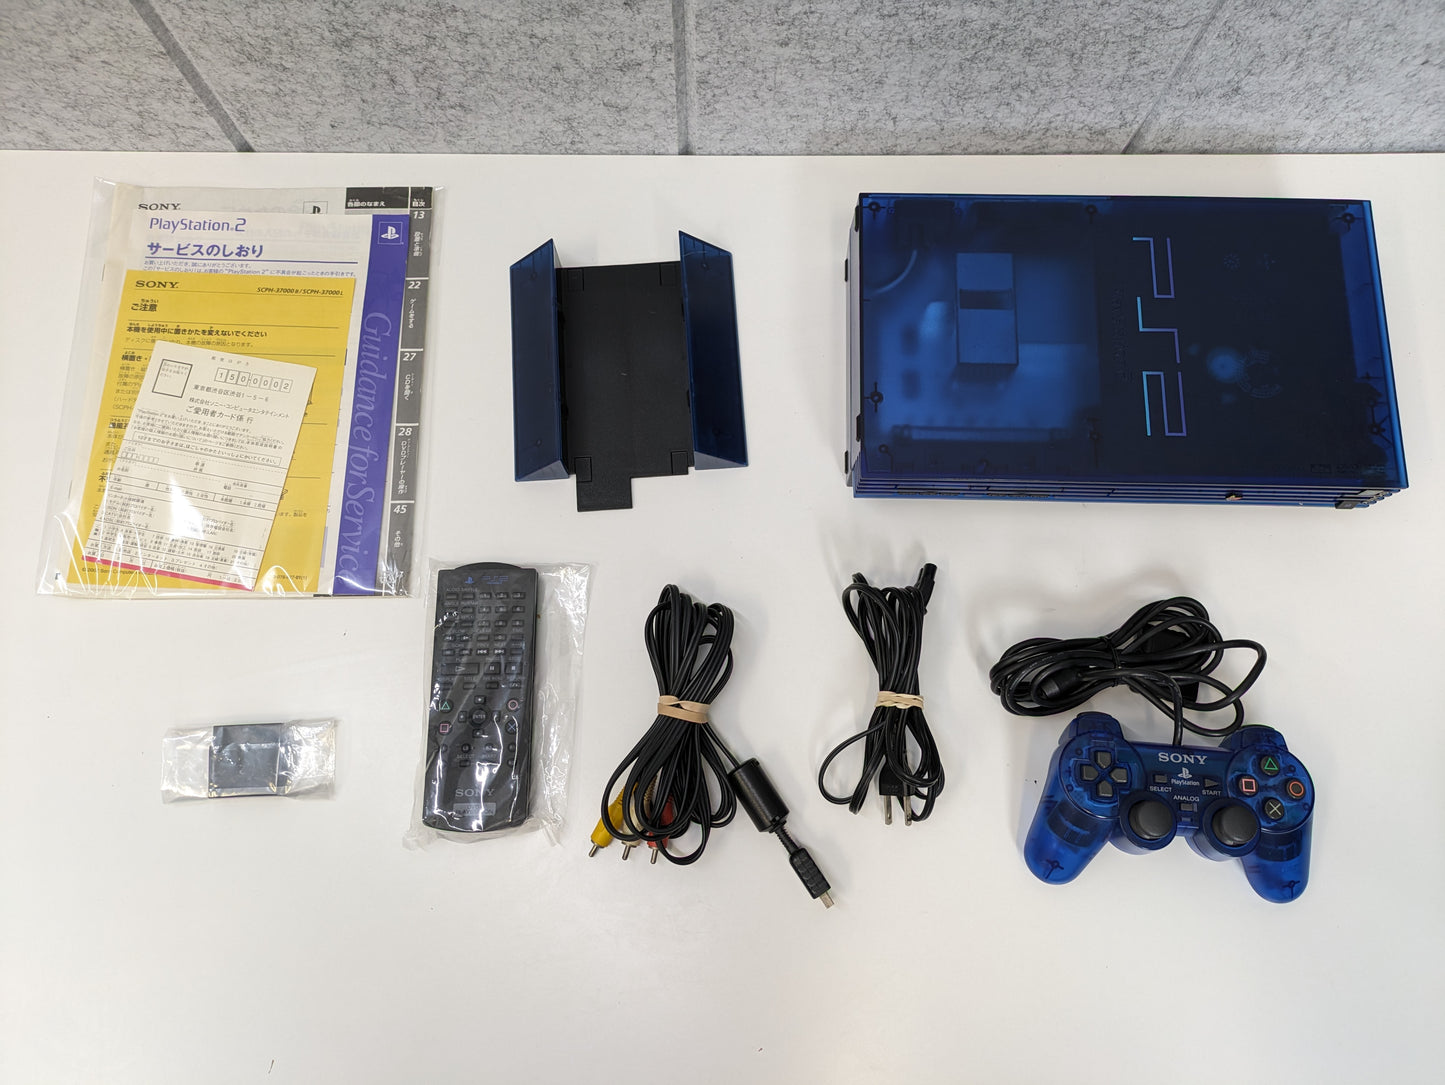 Sony PlayStation 2 PS2 Ocean Blue Console w/ Controller and Cables (Japanese) - USED (CIB)